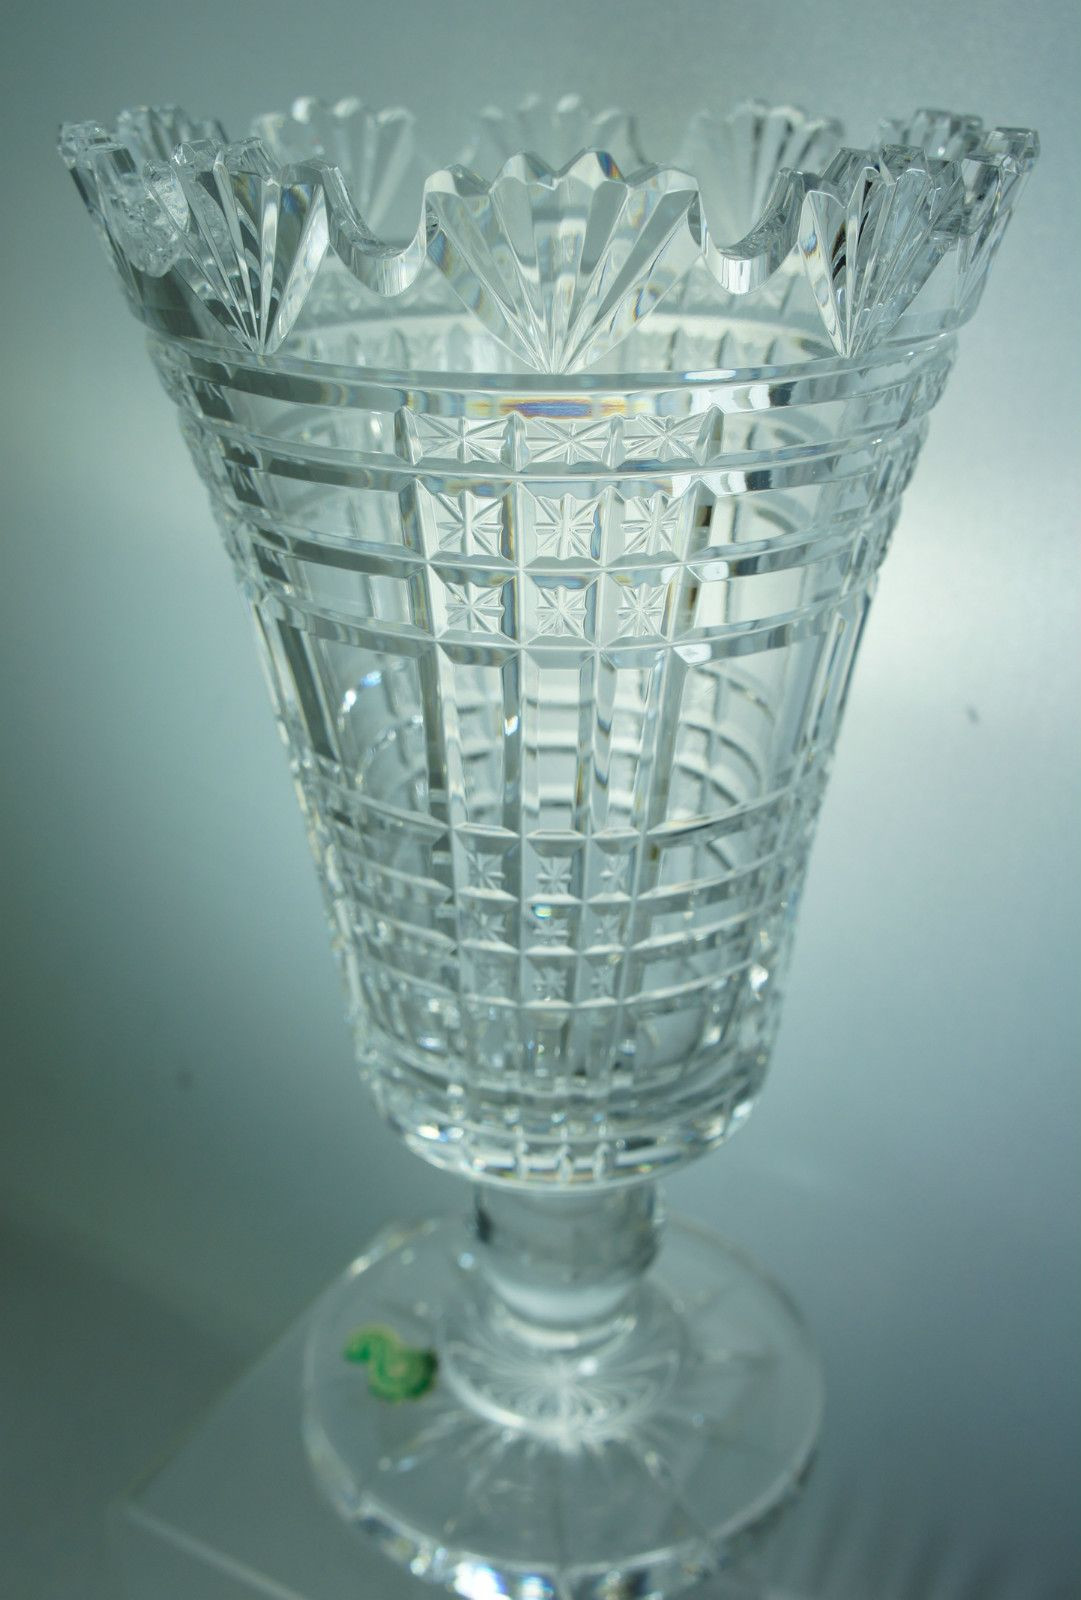 waterford bud vase of antique waterford crystal vases best 2000 antique decor ideas with regard to vintage waterford crystal footed vase sharp scalloped edges